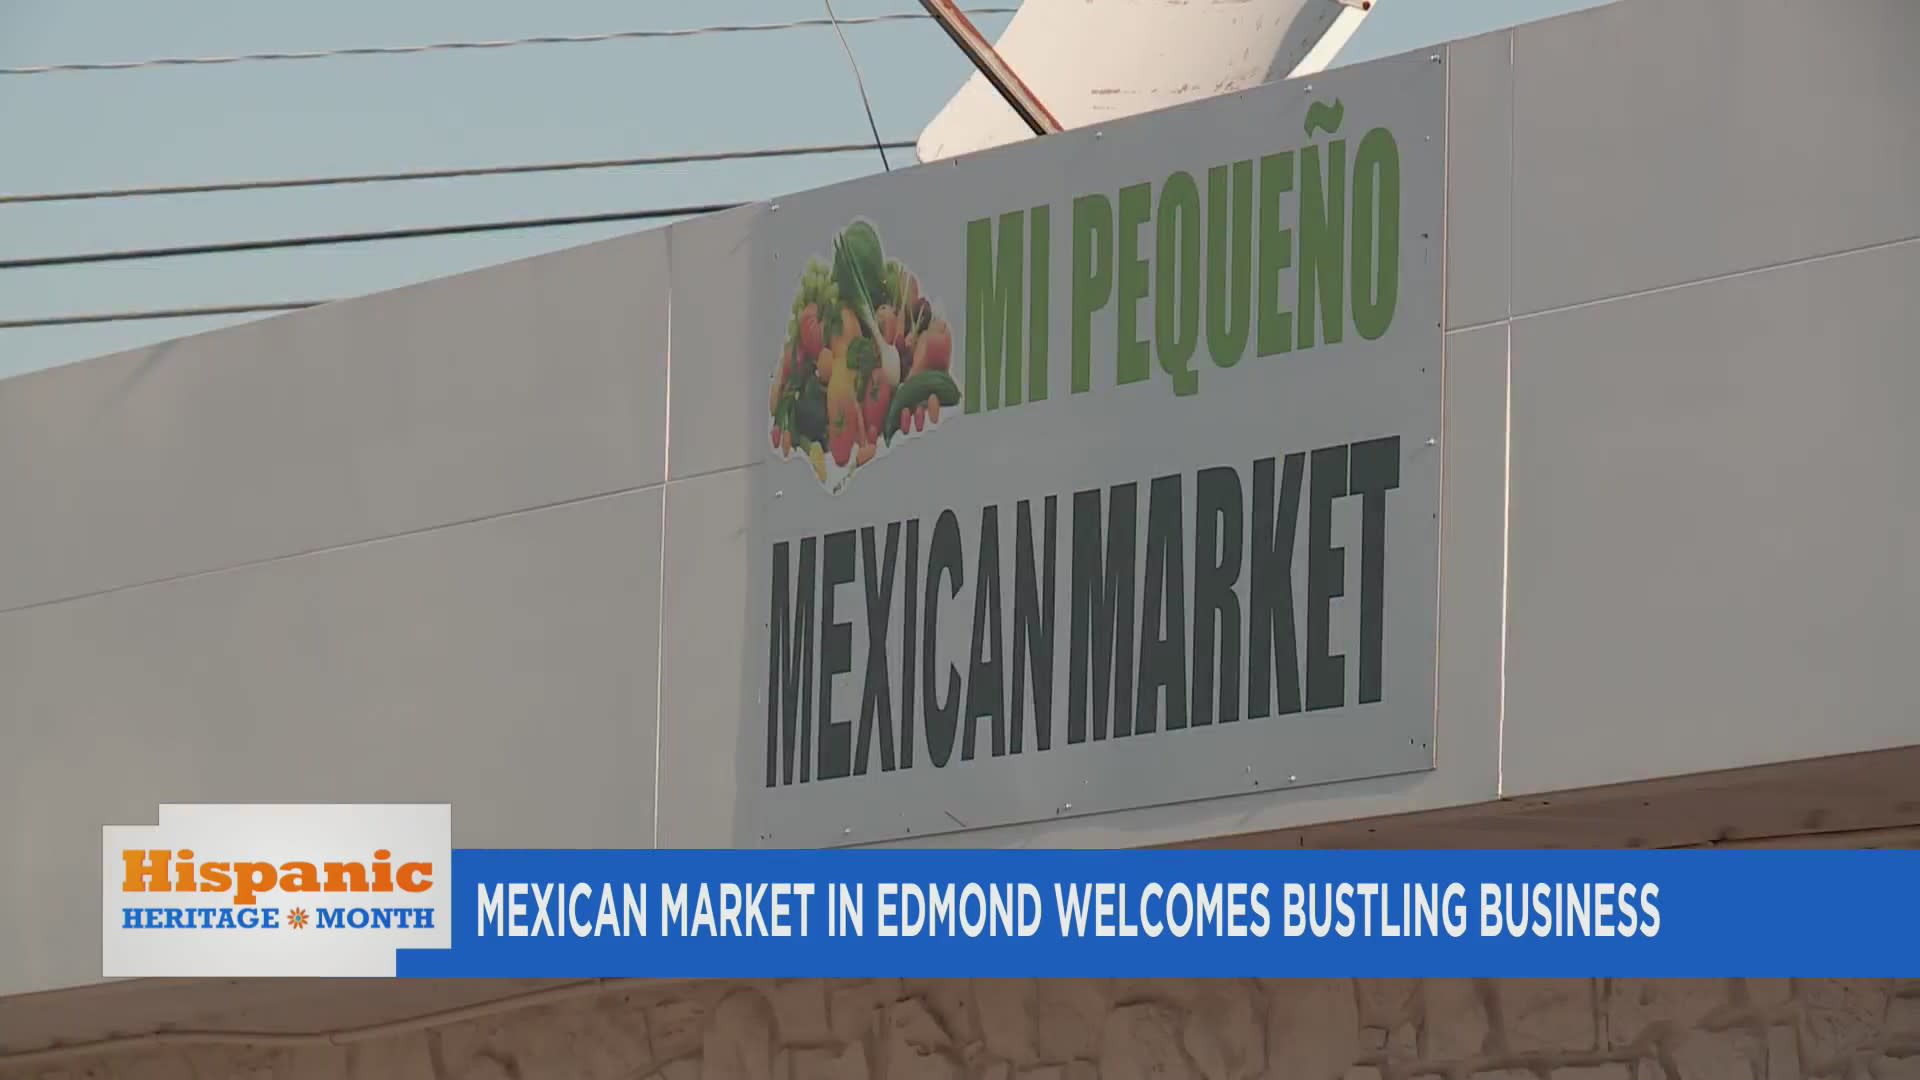 New Location Brings New Customers for Mexican Market